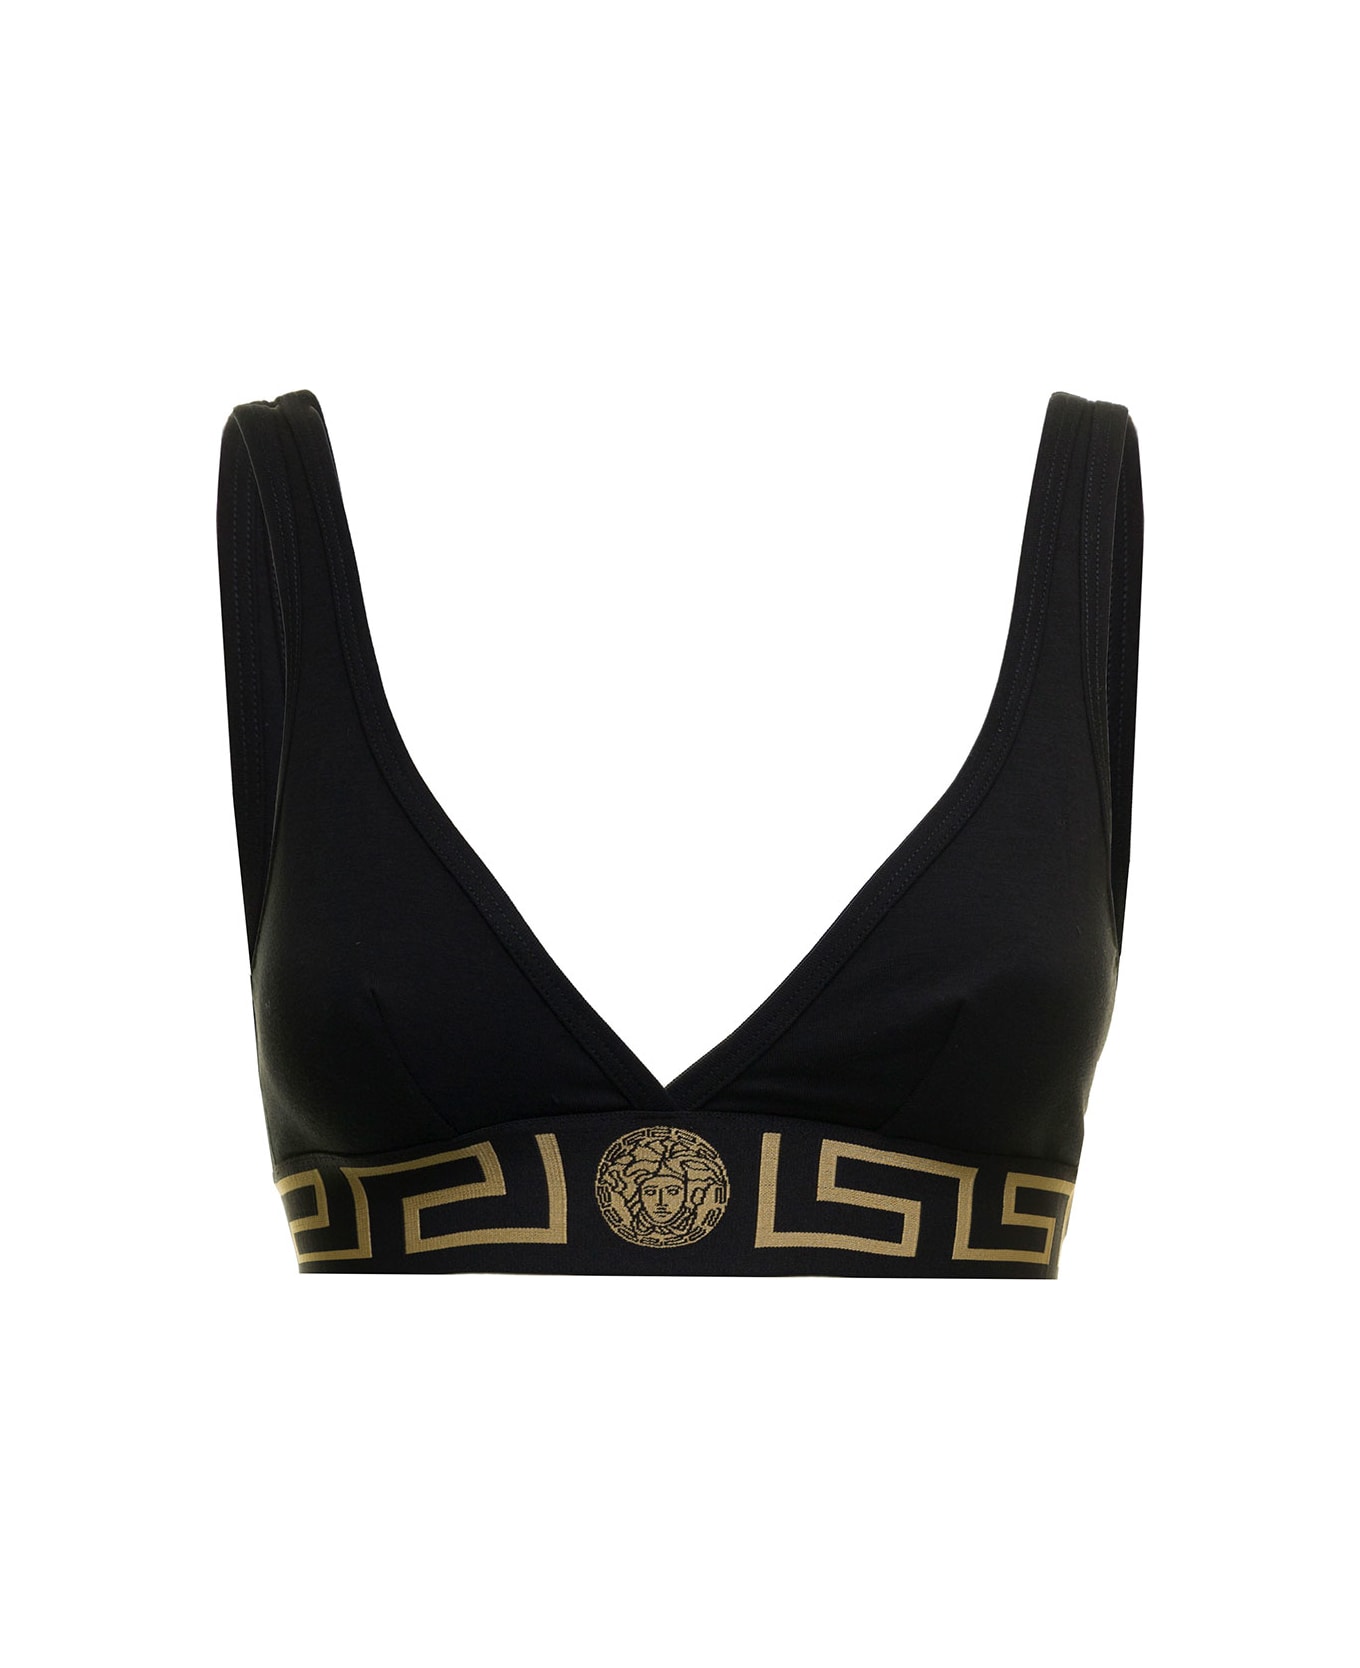 Versace Woman's Black Stretch Cotton Top With Greek Insert Detail - Black